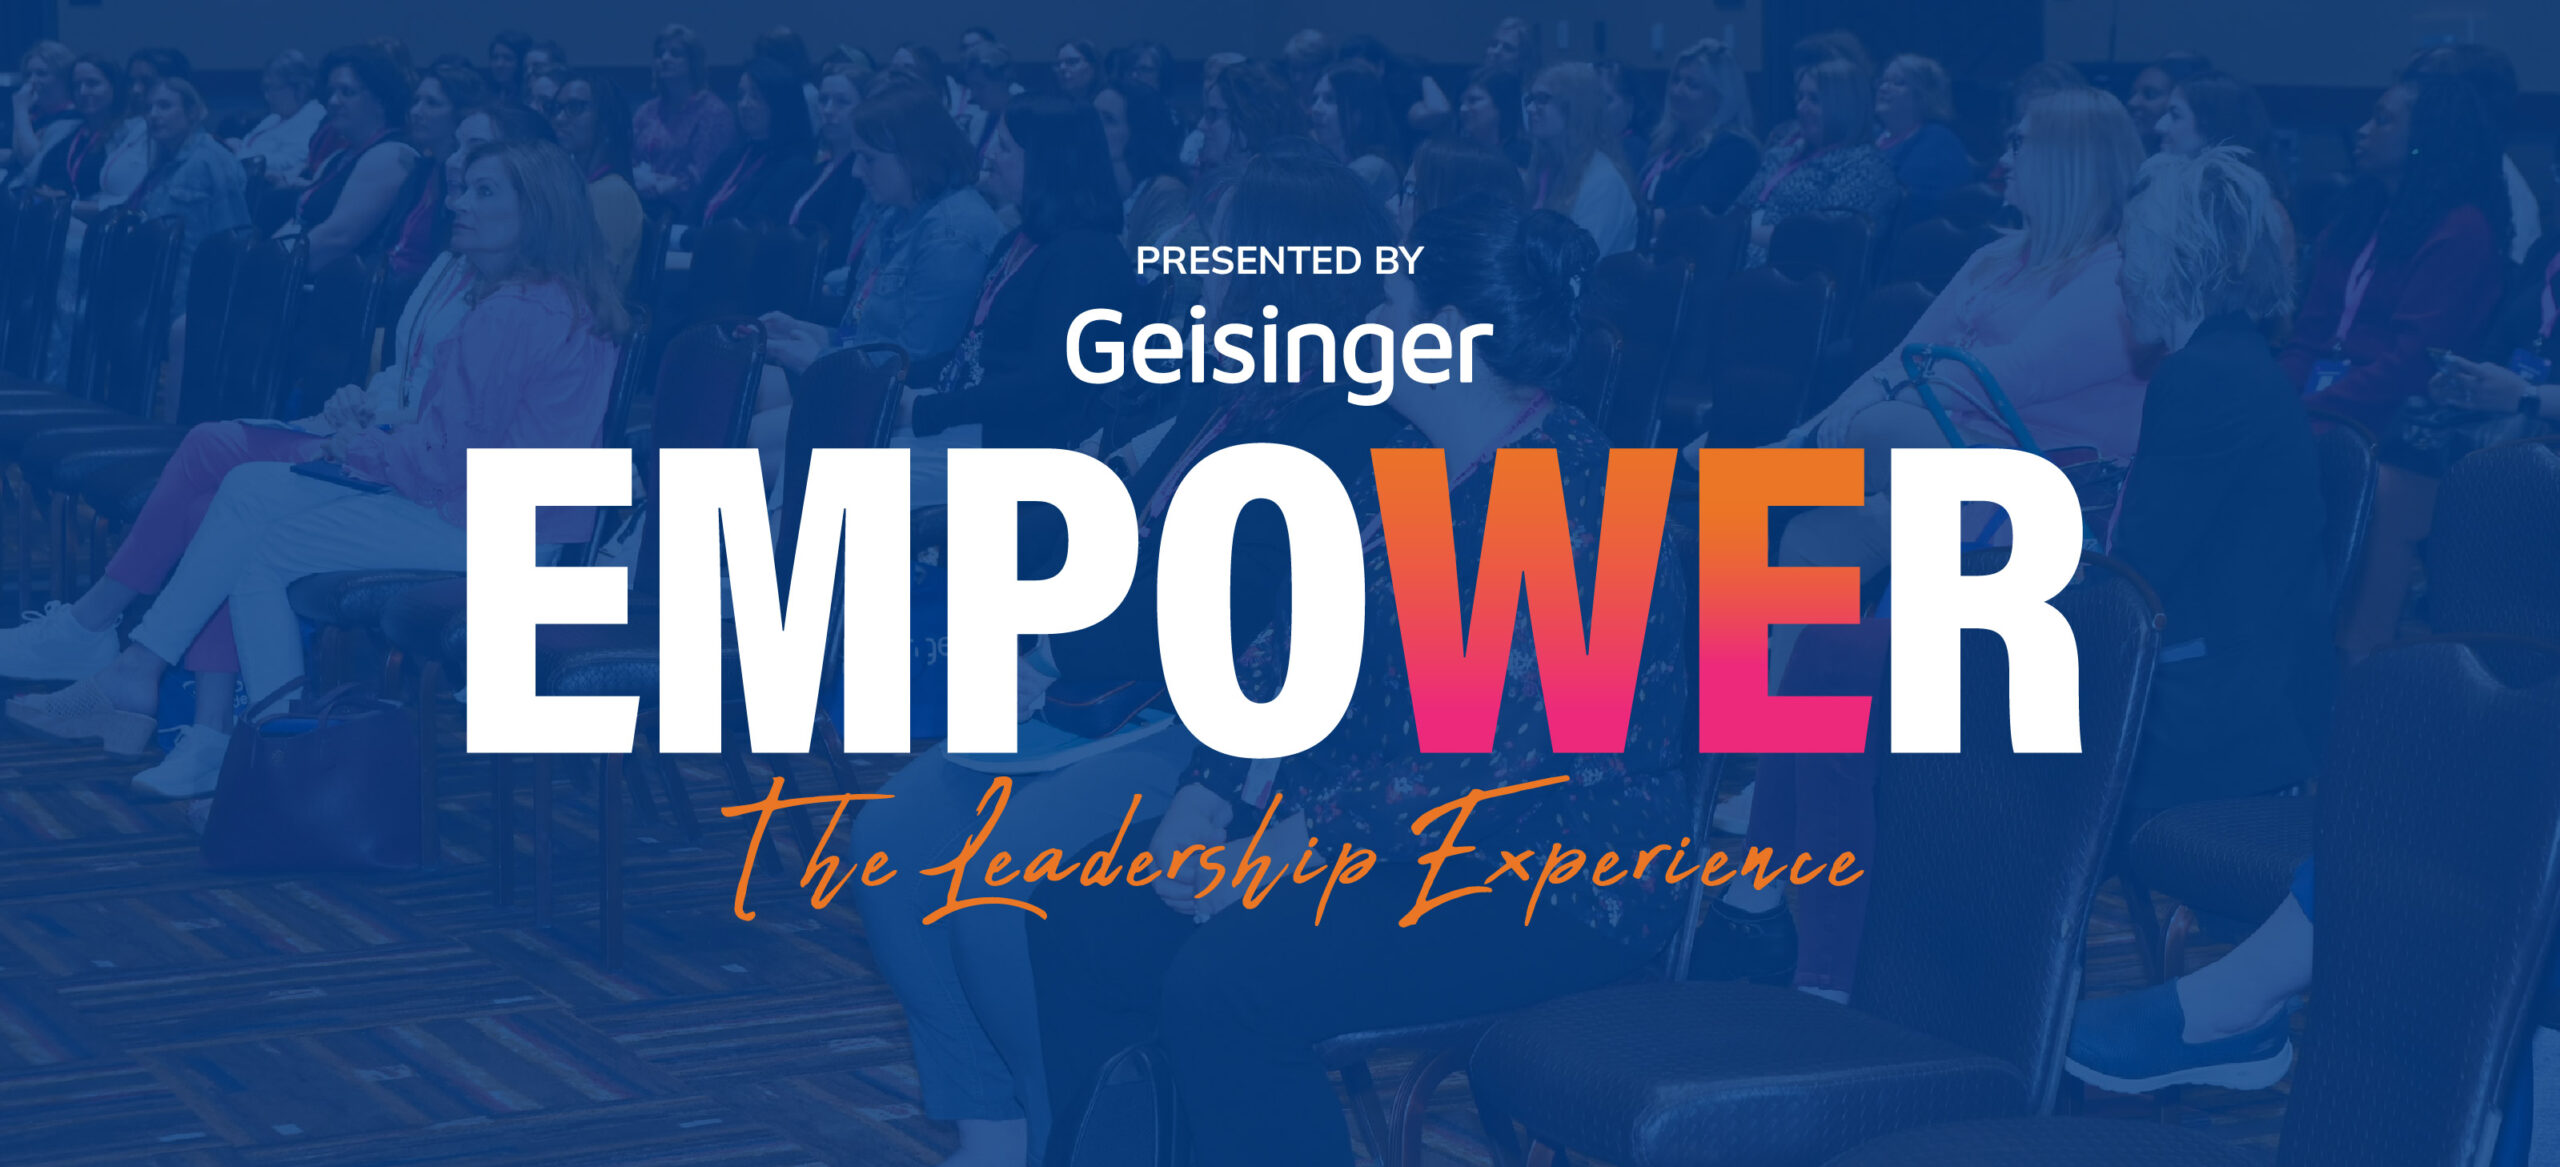 EMPOWER, The Leadership Experience